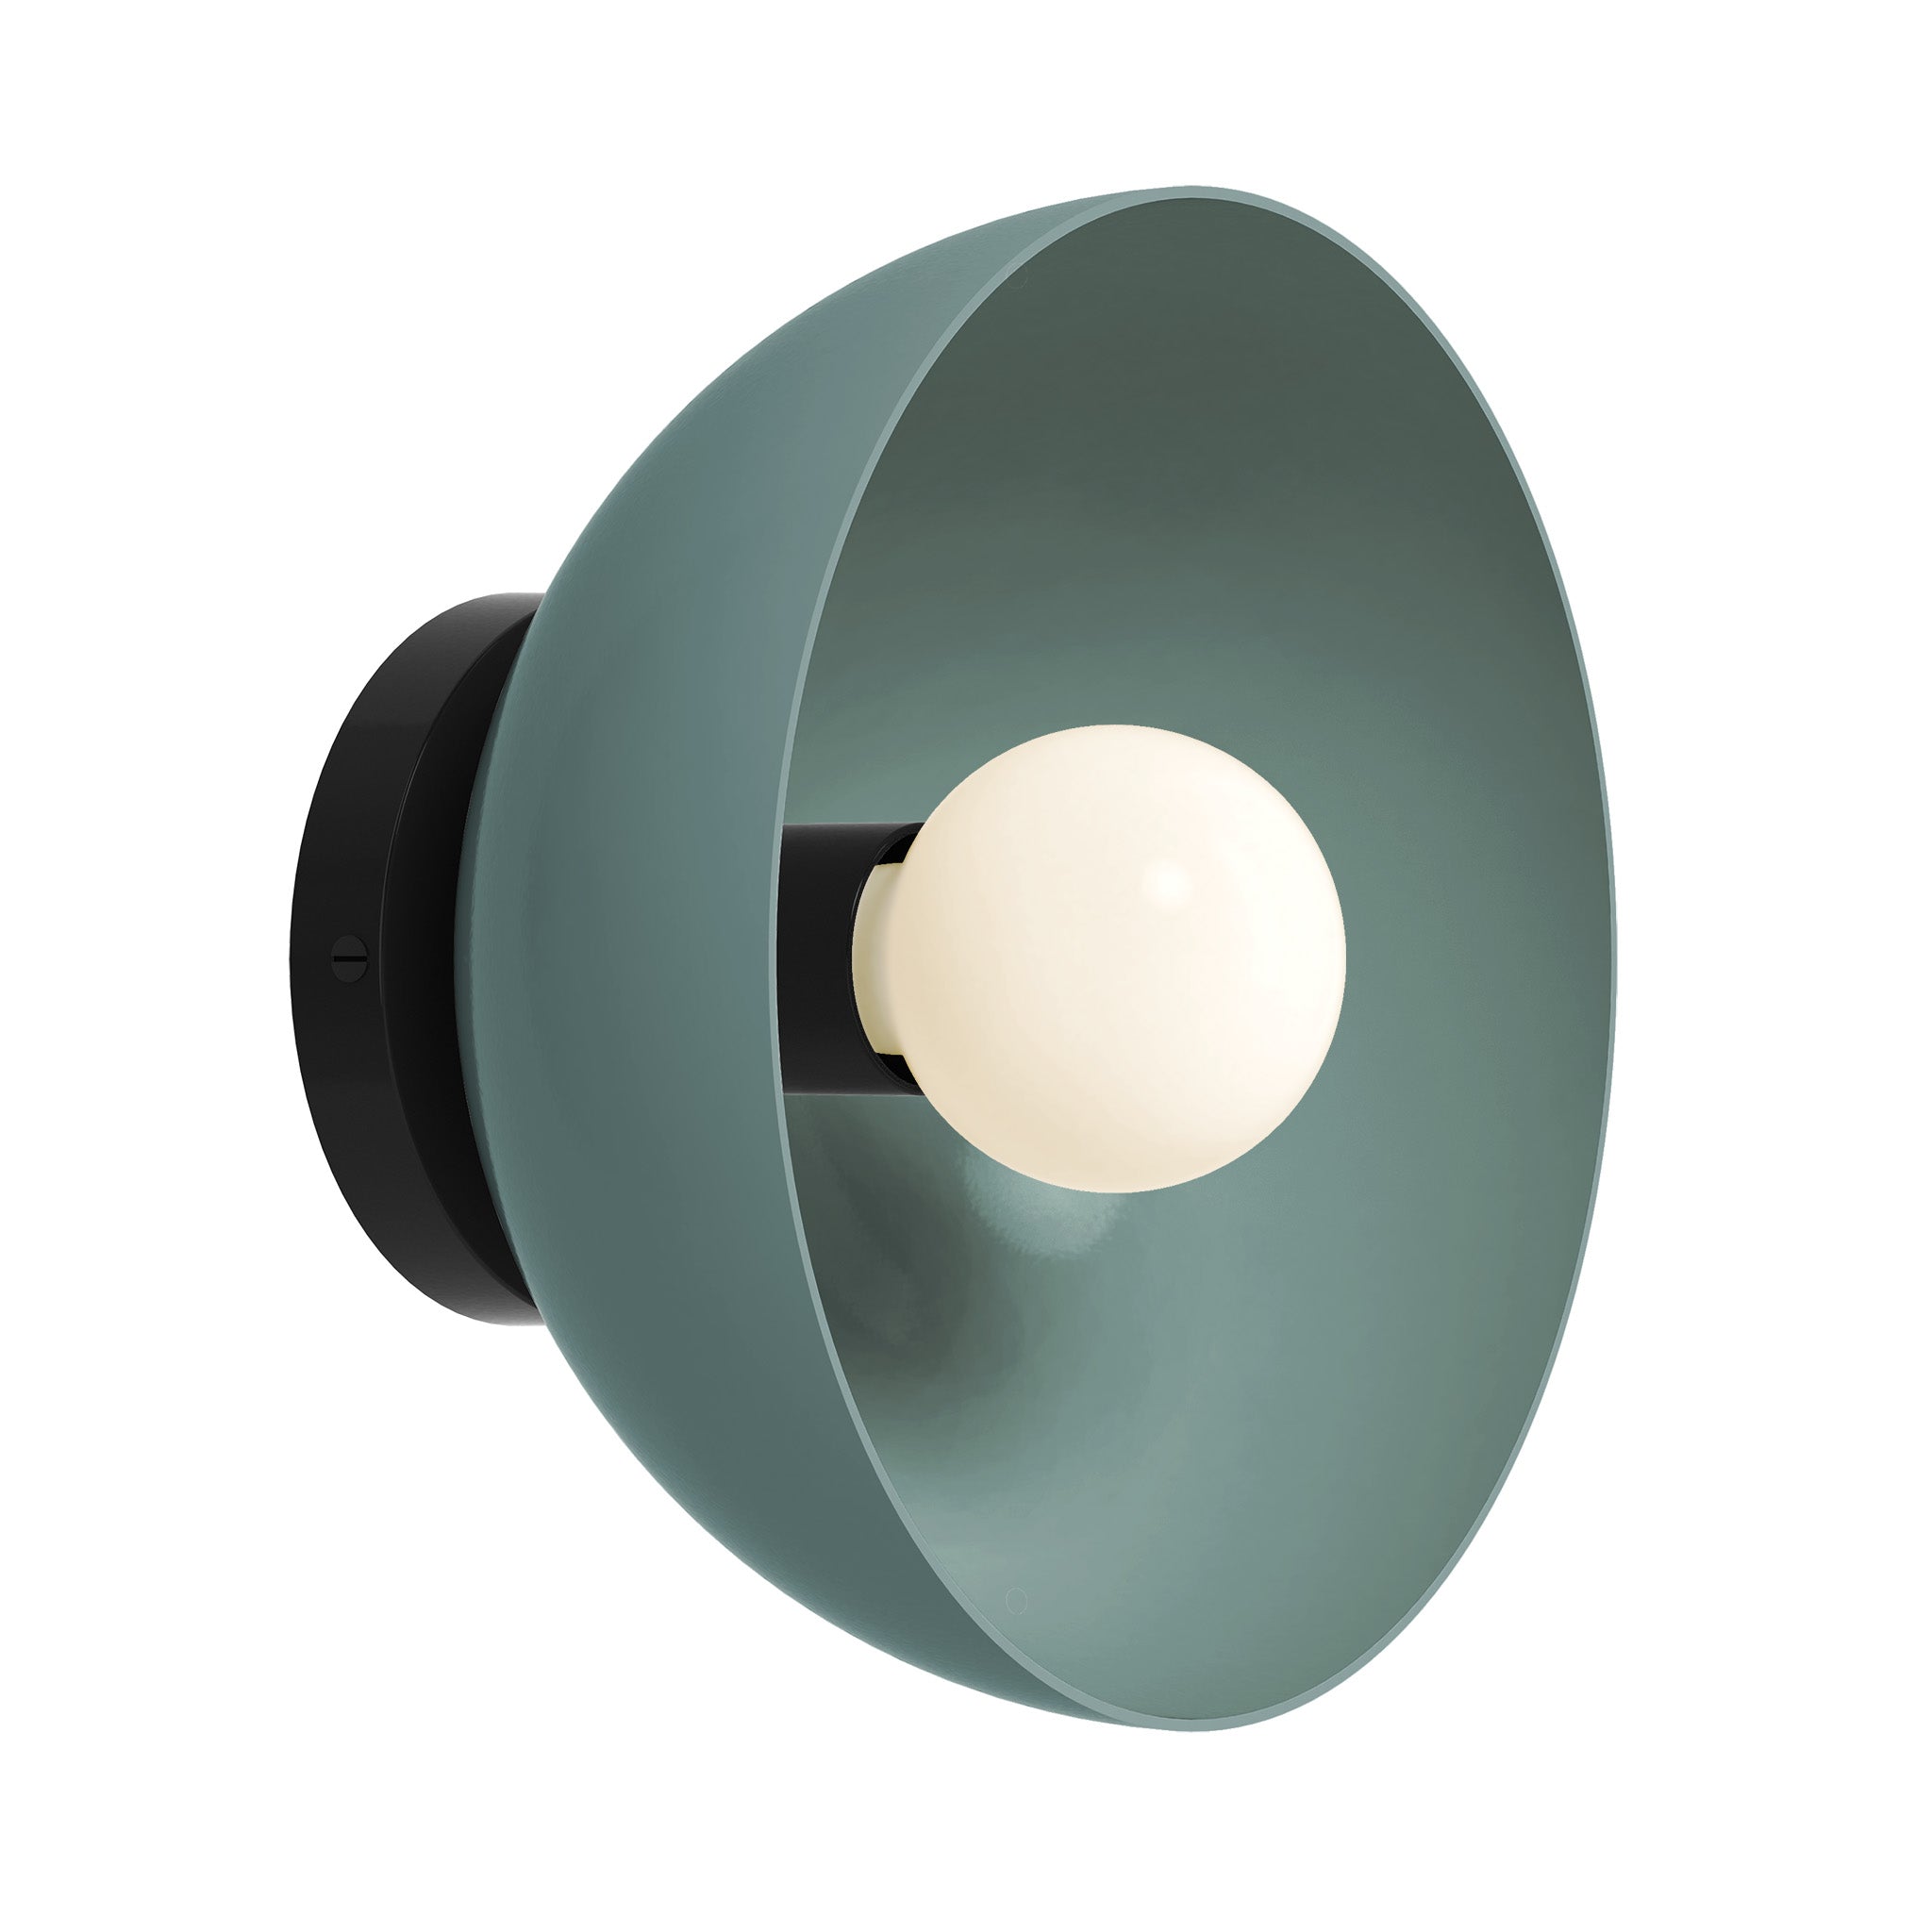 Black and lagoon color hemi dome sconce 10" Dutton Brown lighting